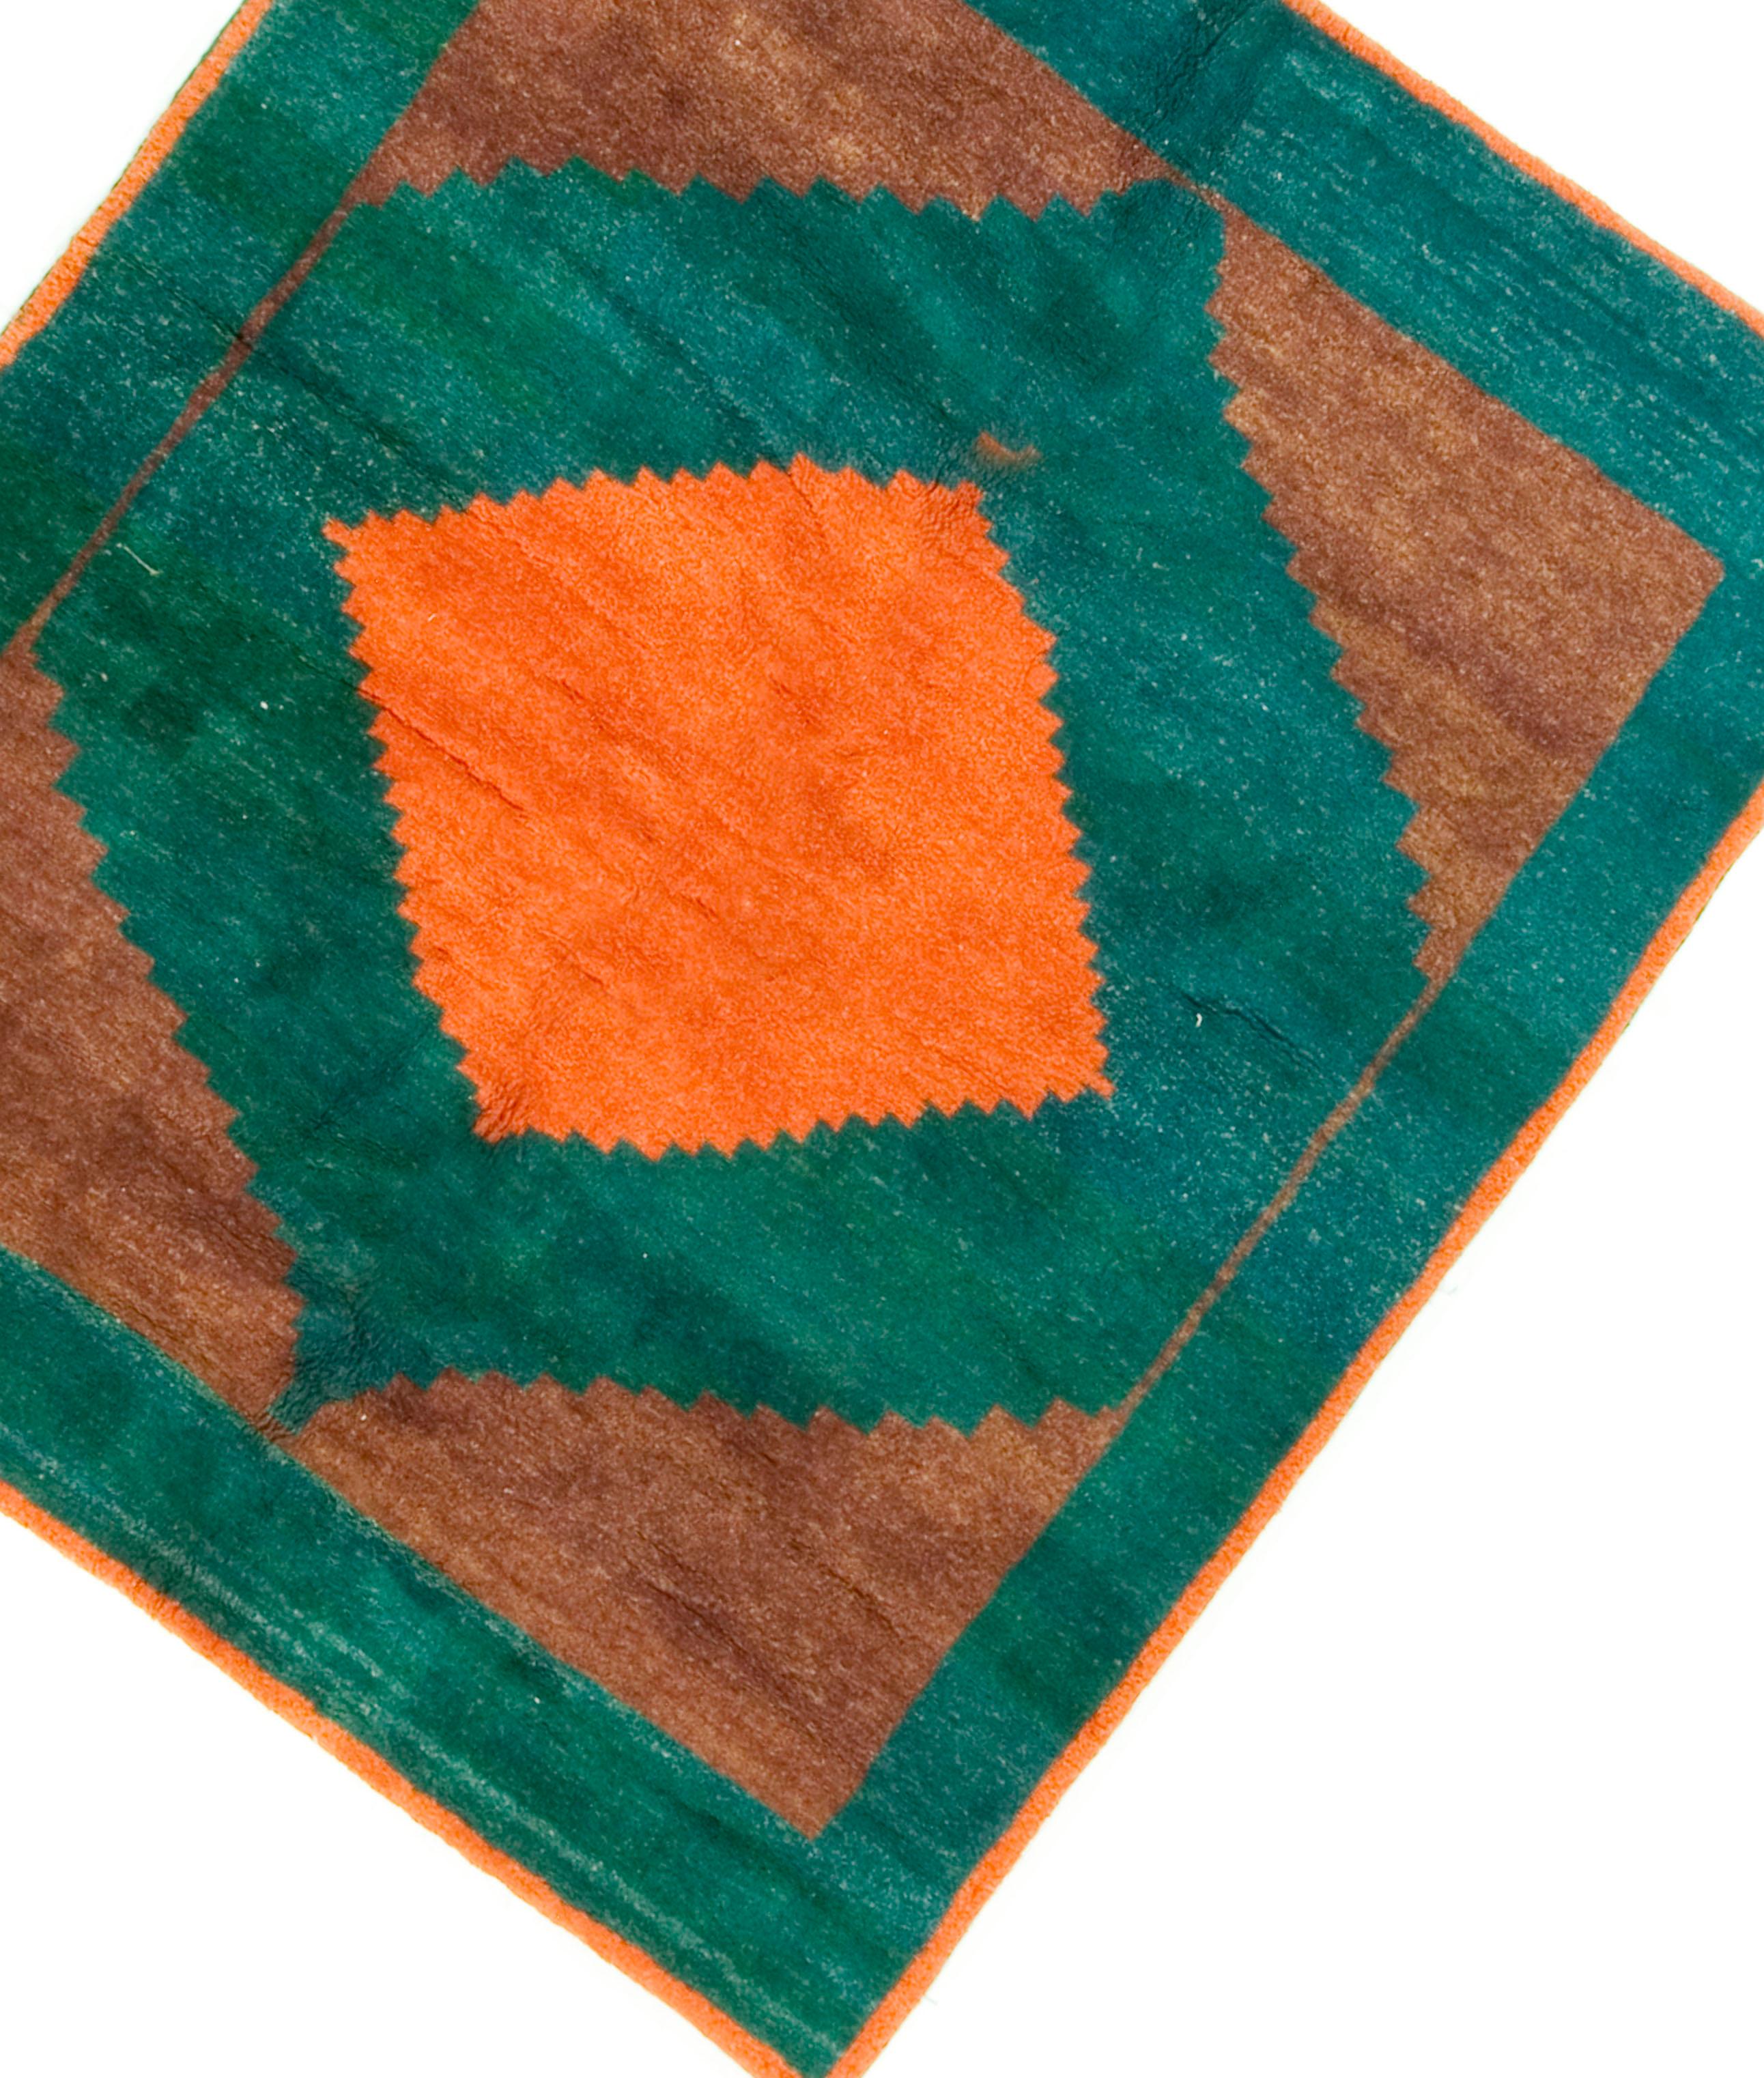 Hand-Woven Vintage Gabbeh Rug 6'5 X 7'2 For Sale